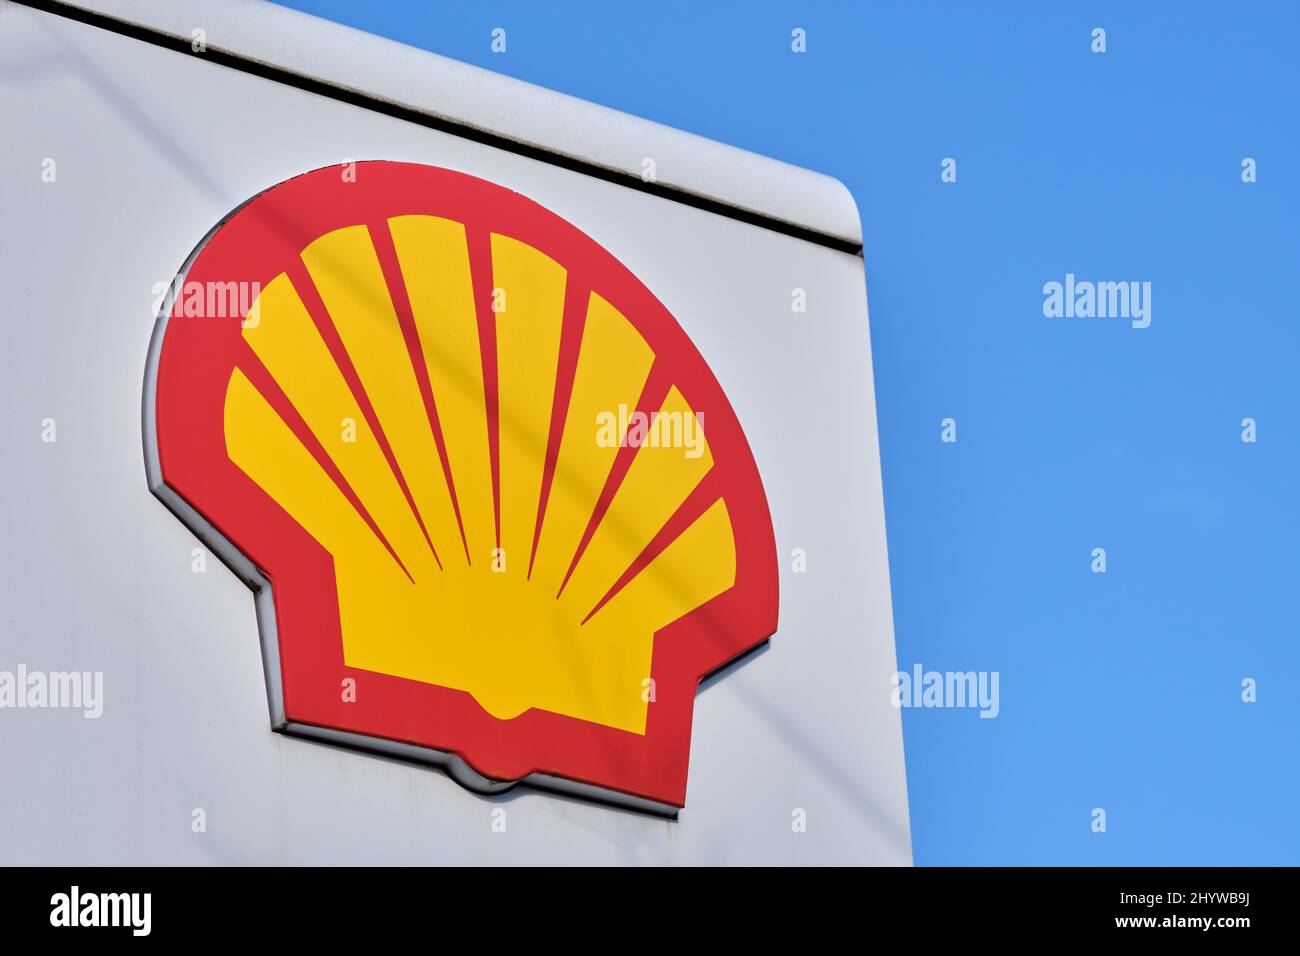 Nuremberg, Germany - March 14, 2022: Close - up of the logo of the Shell oil and gas company at a gas station against blue sky. Stock Photo